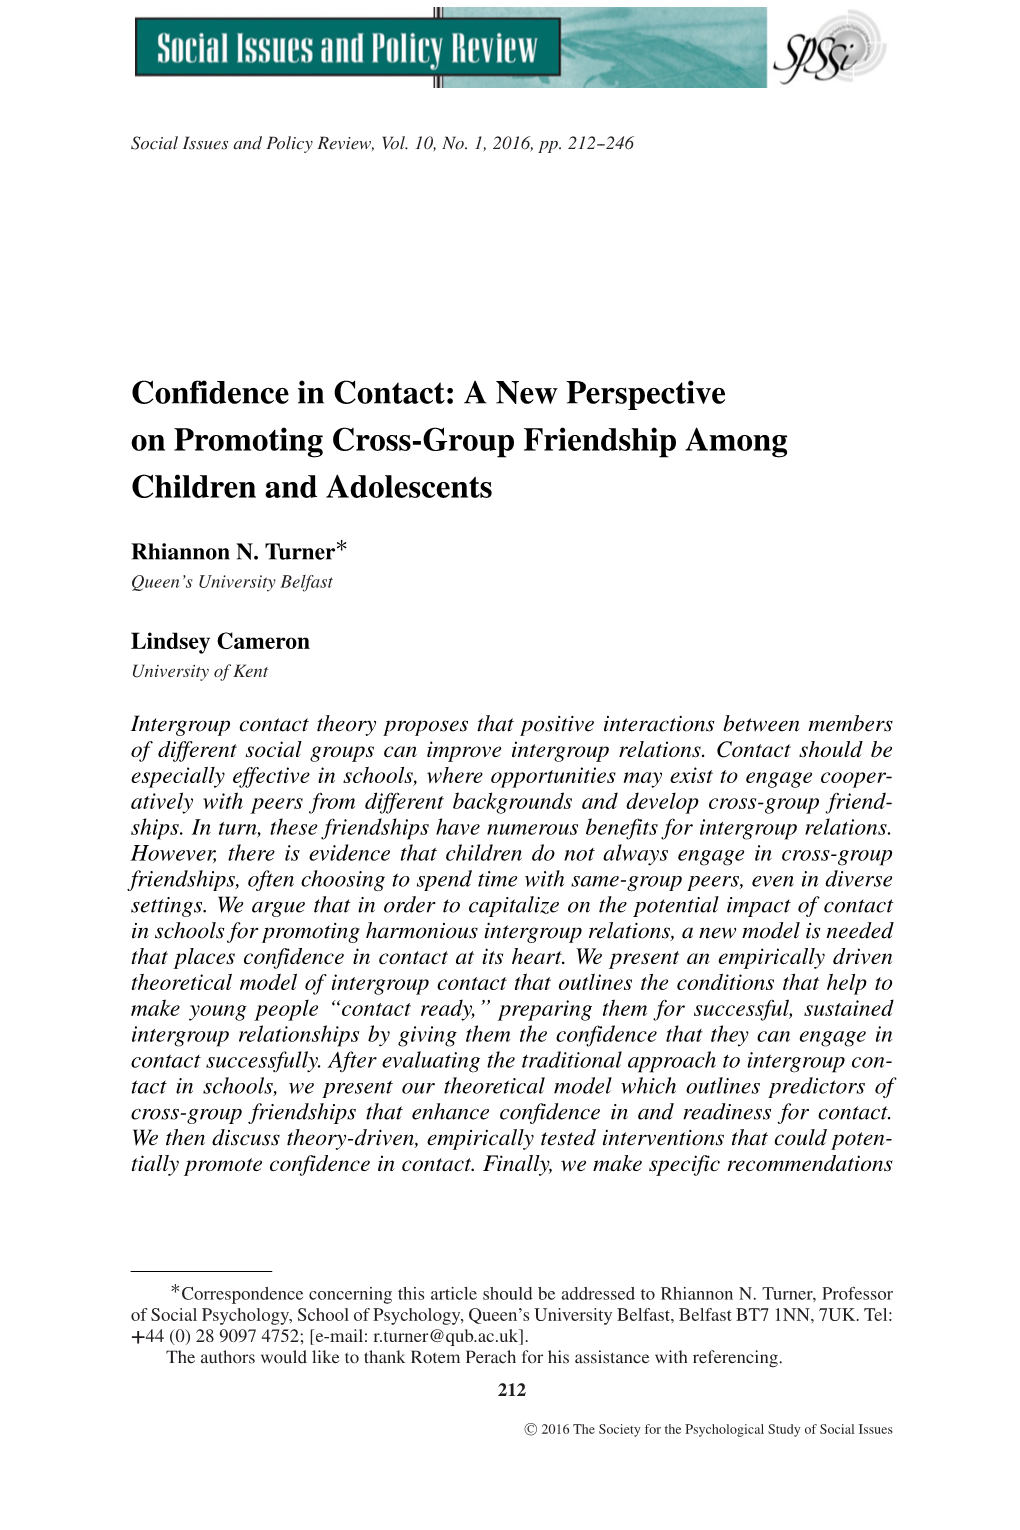 Confidence in Contact: a New Perspective on Promoting Cross&#X02010;Group Friendship Among Children and Adolescents